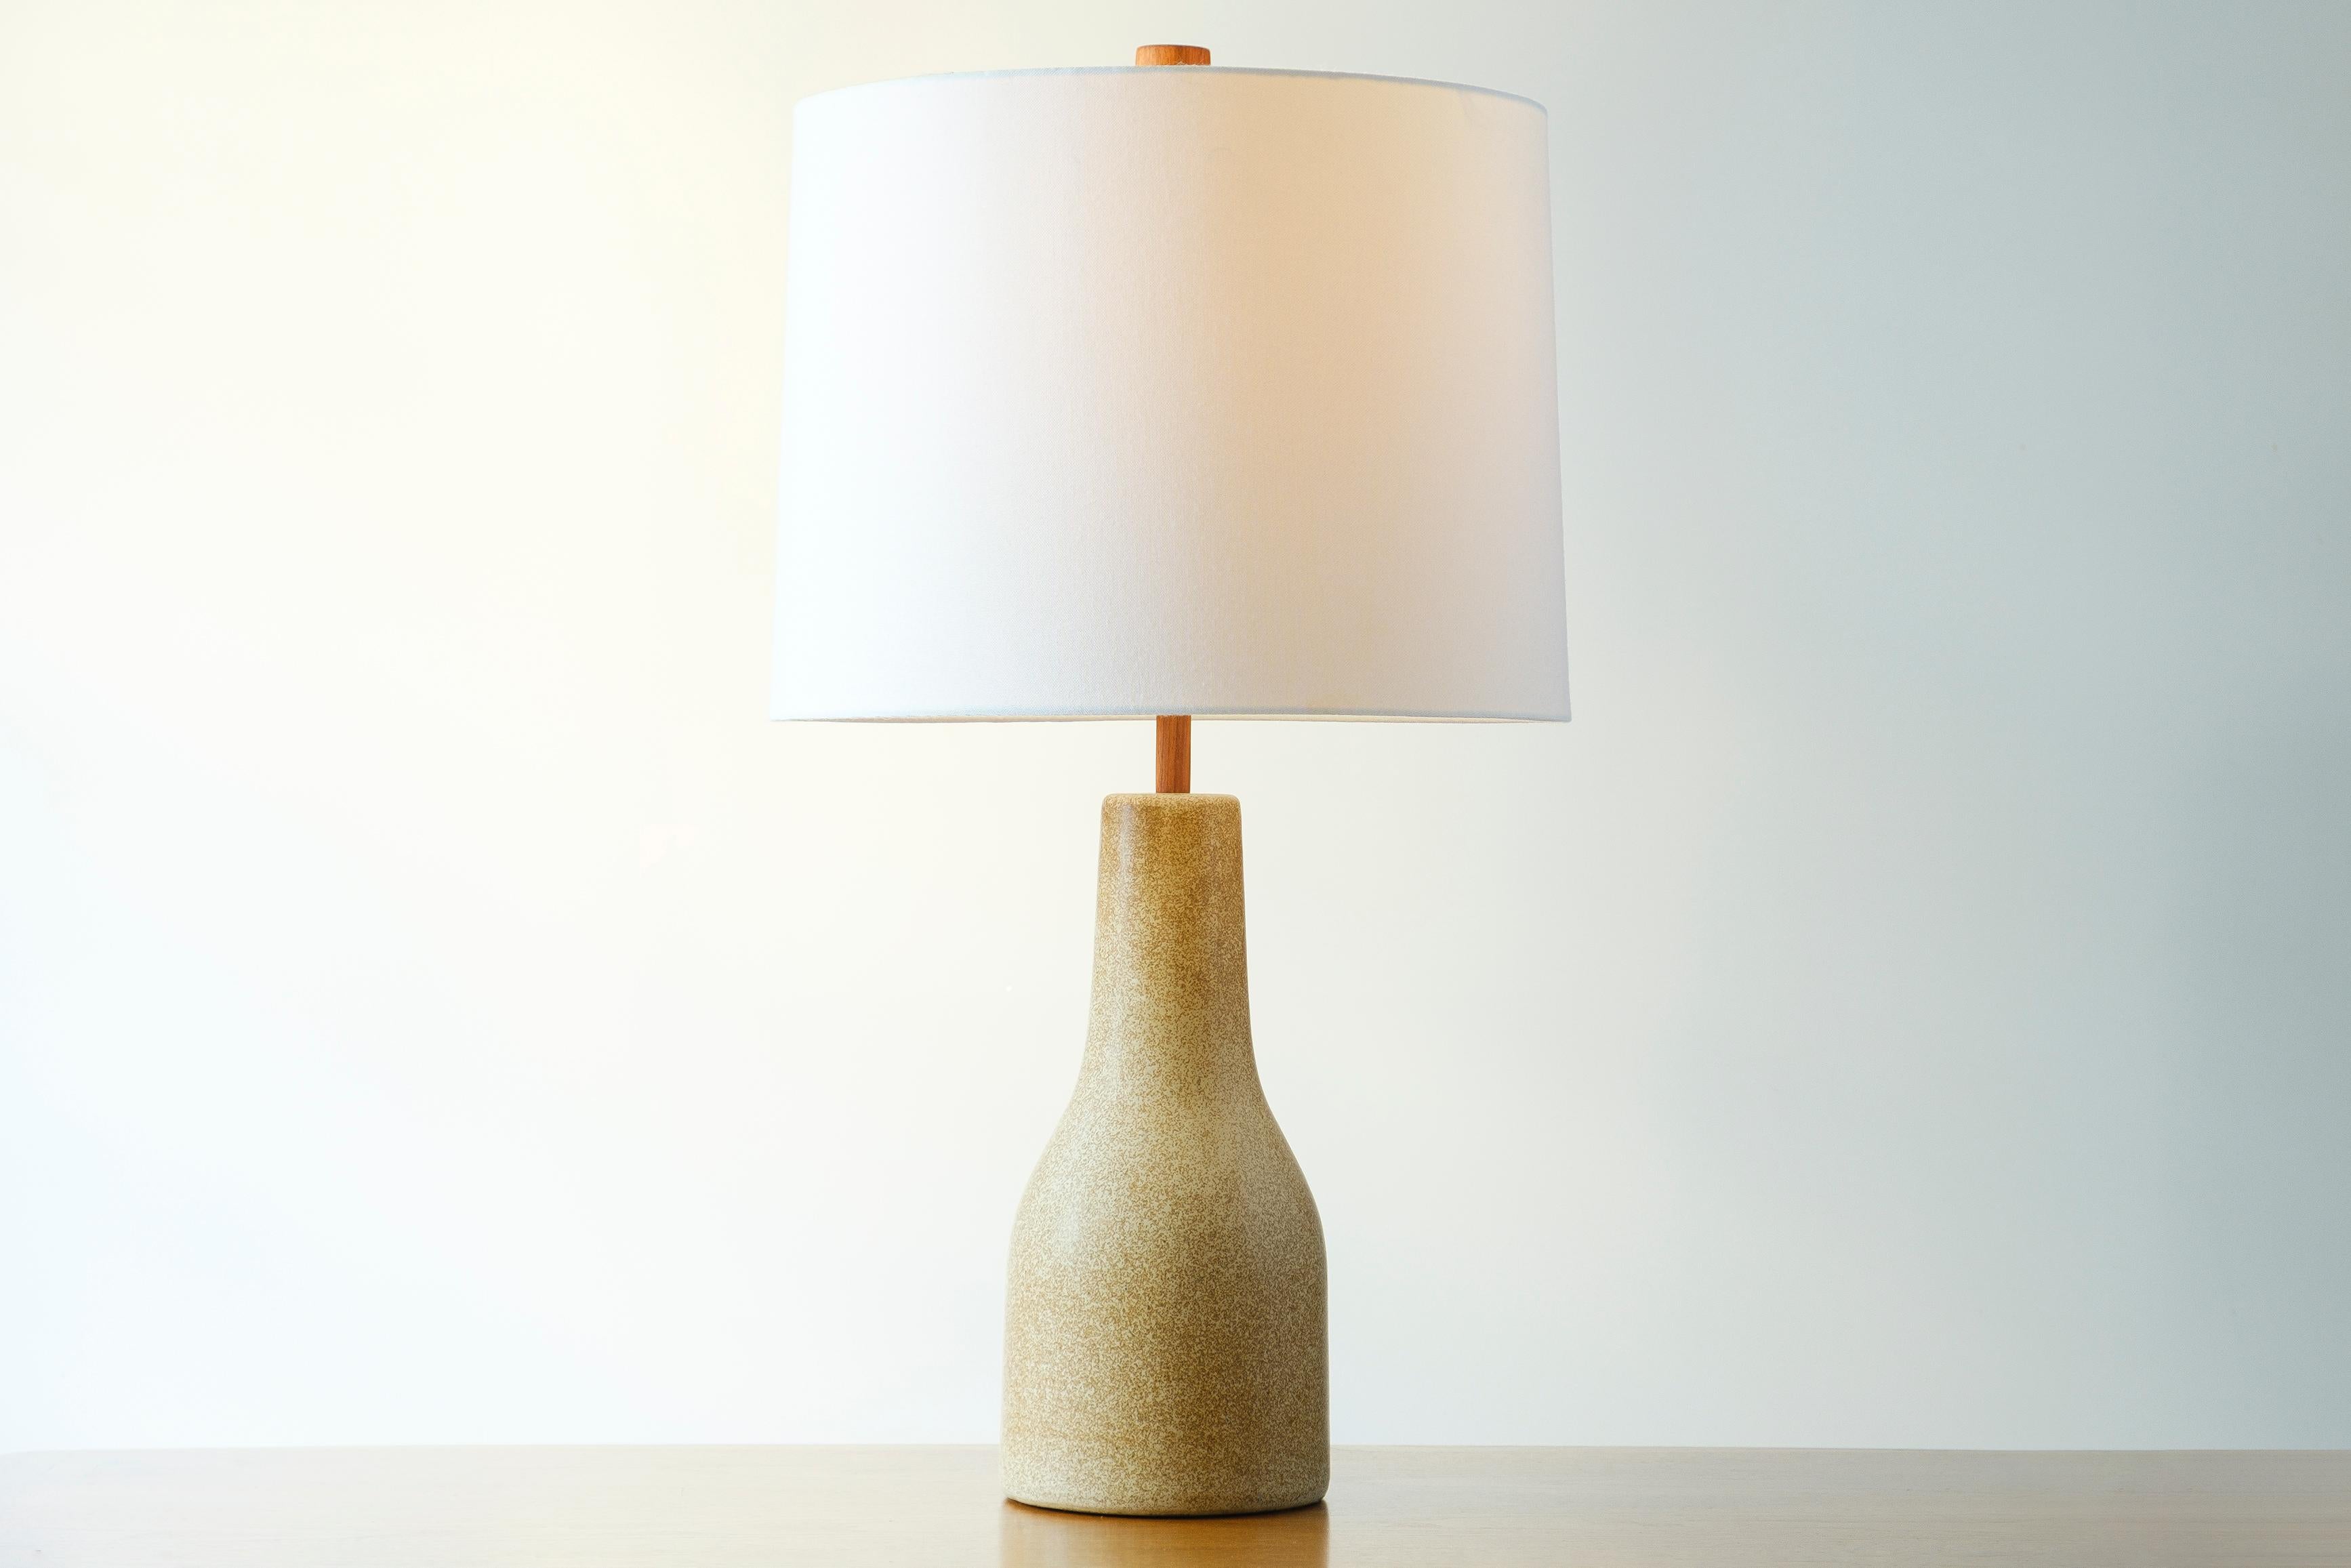 What is it?
—
Another gem from the masters of mid century lightning – Gordon and Jane Martz.

This signed Martz #84 lamp comes in a matte tan glaze with a darker flecks of color. There is a slightly green undertone to the glaze that is presents